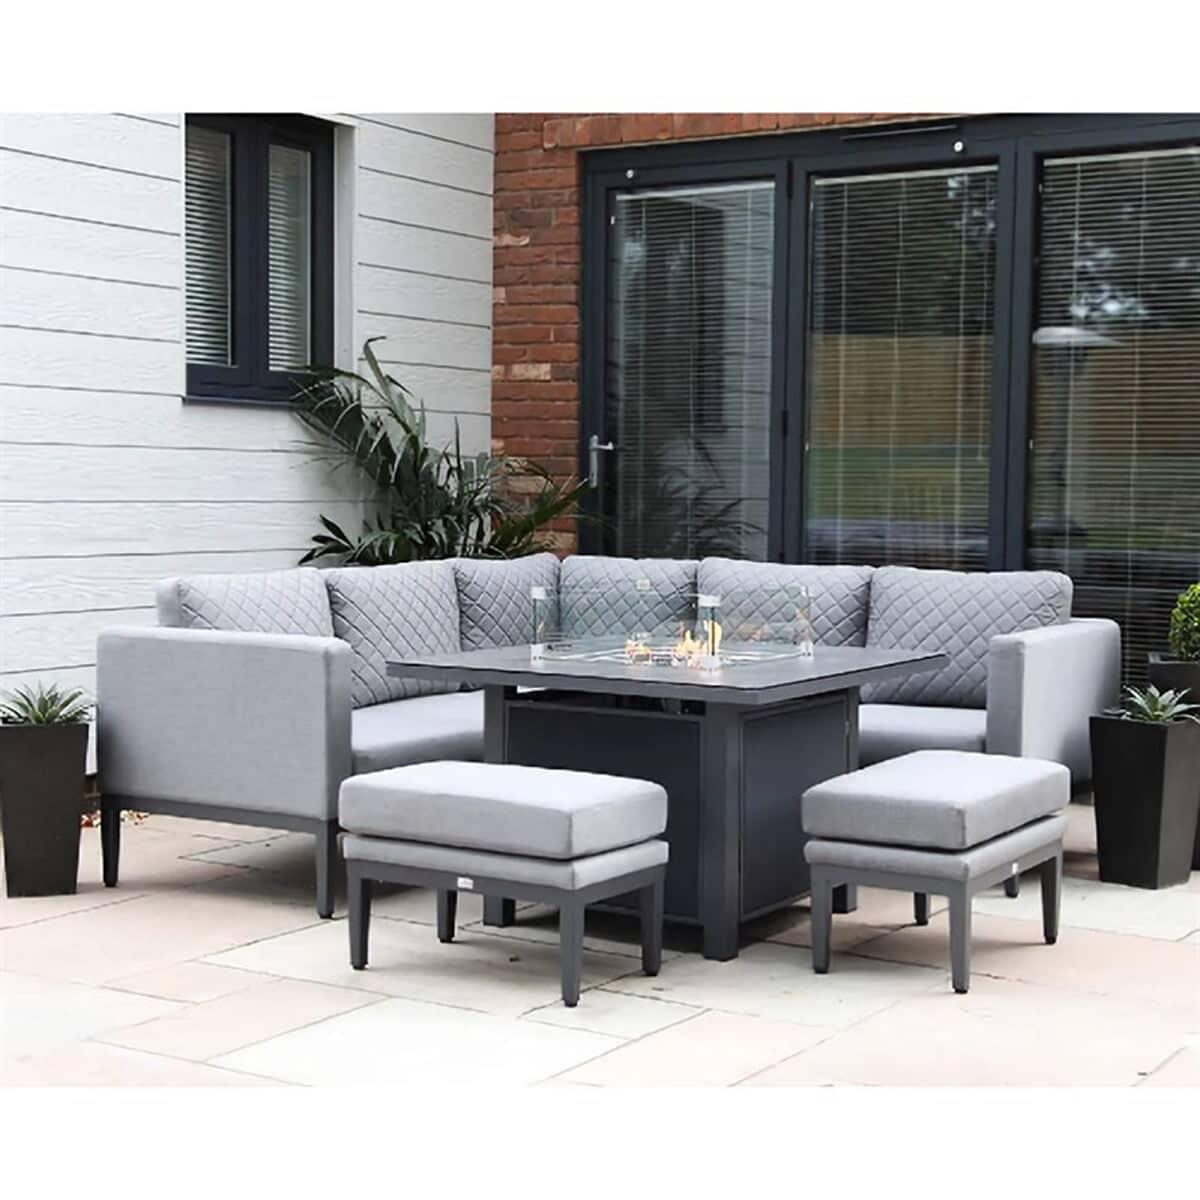 Supremo Mirfield Mini Modular Set with Square Firepit Table